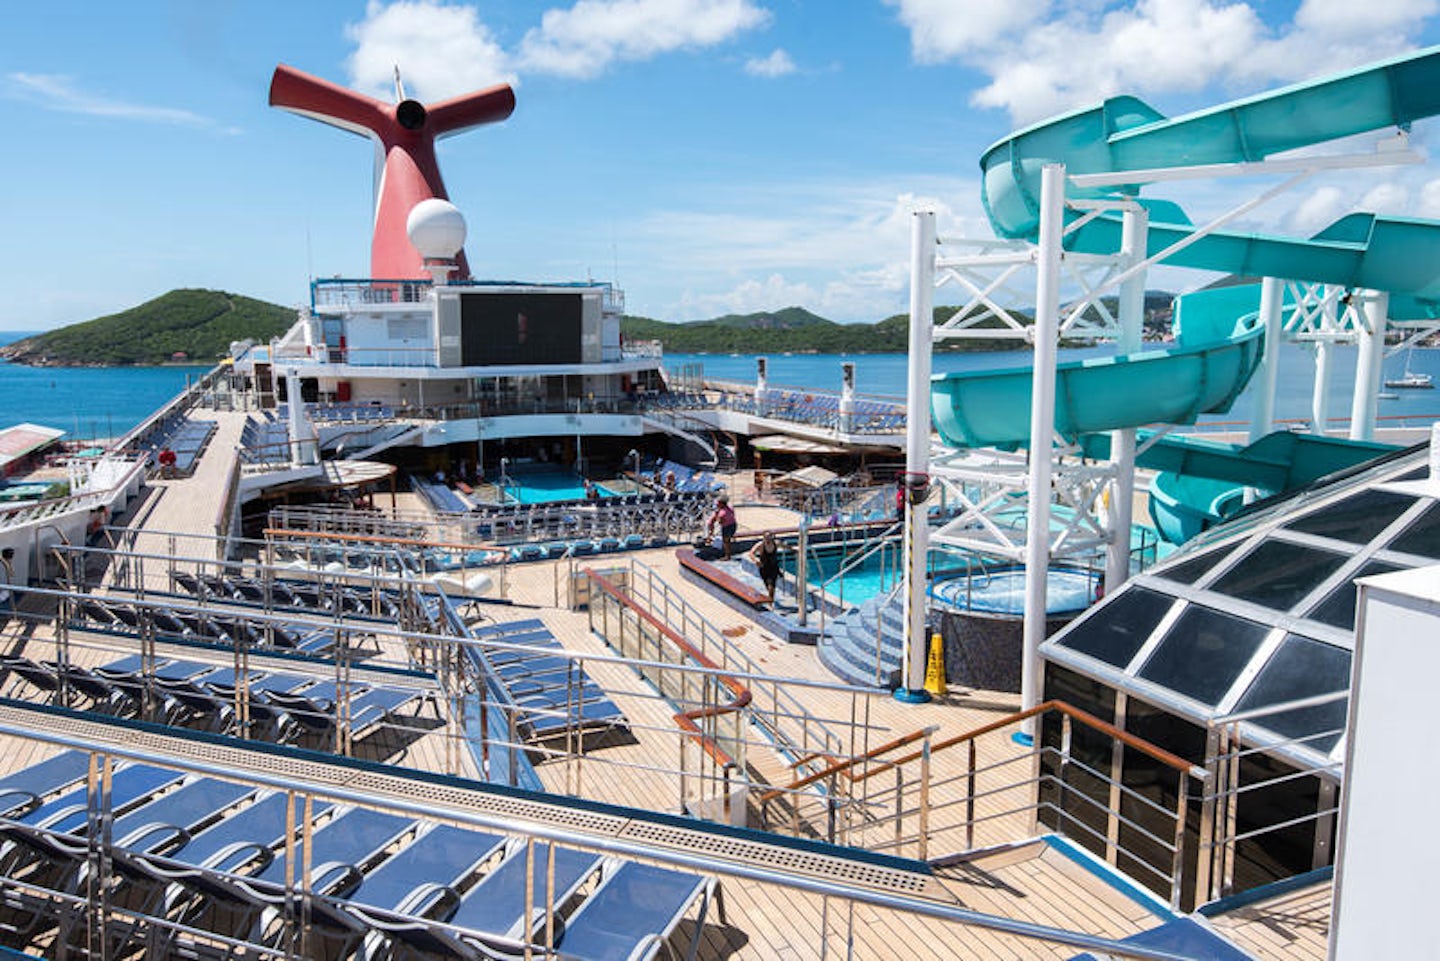 The Coney Island Pool on Carnival Liberty